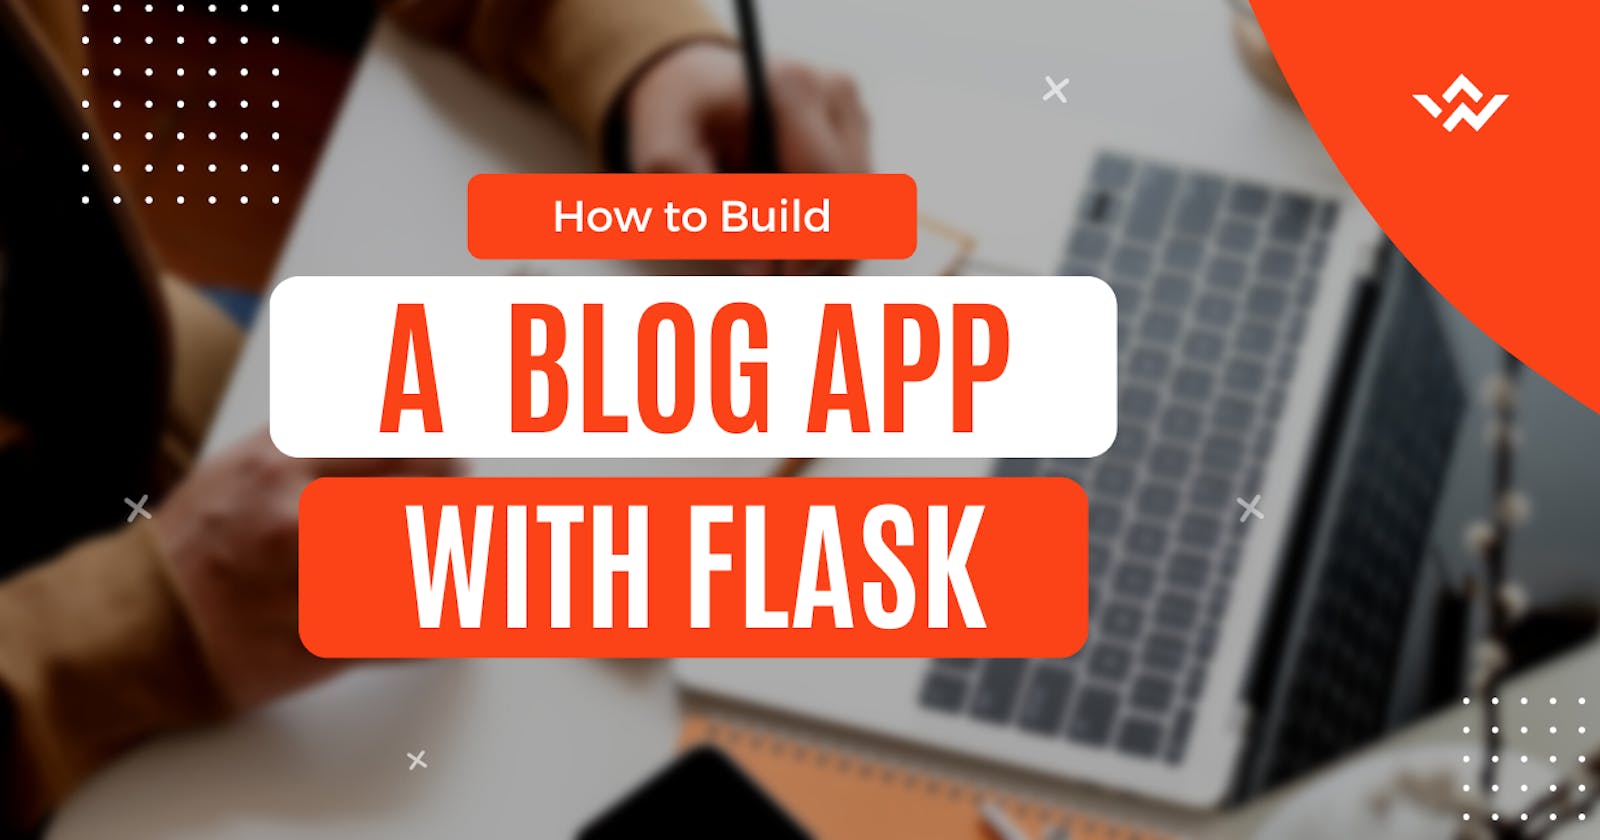 How to Build a Blog App with Flask